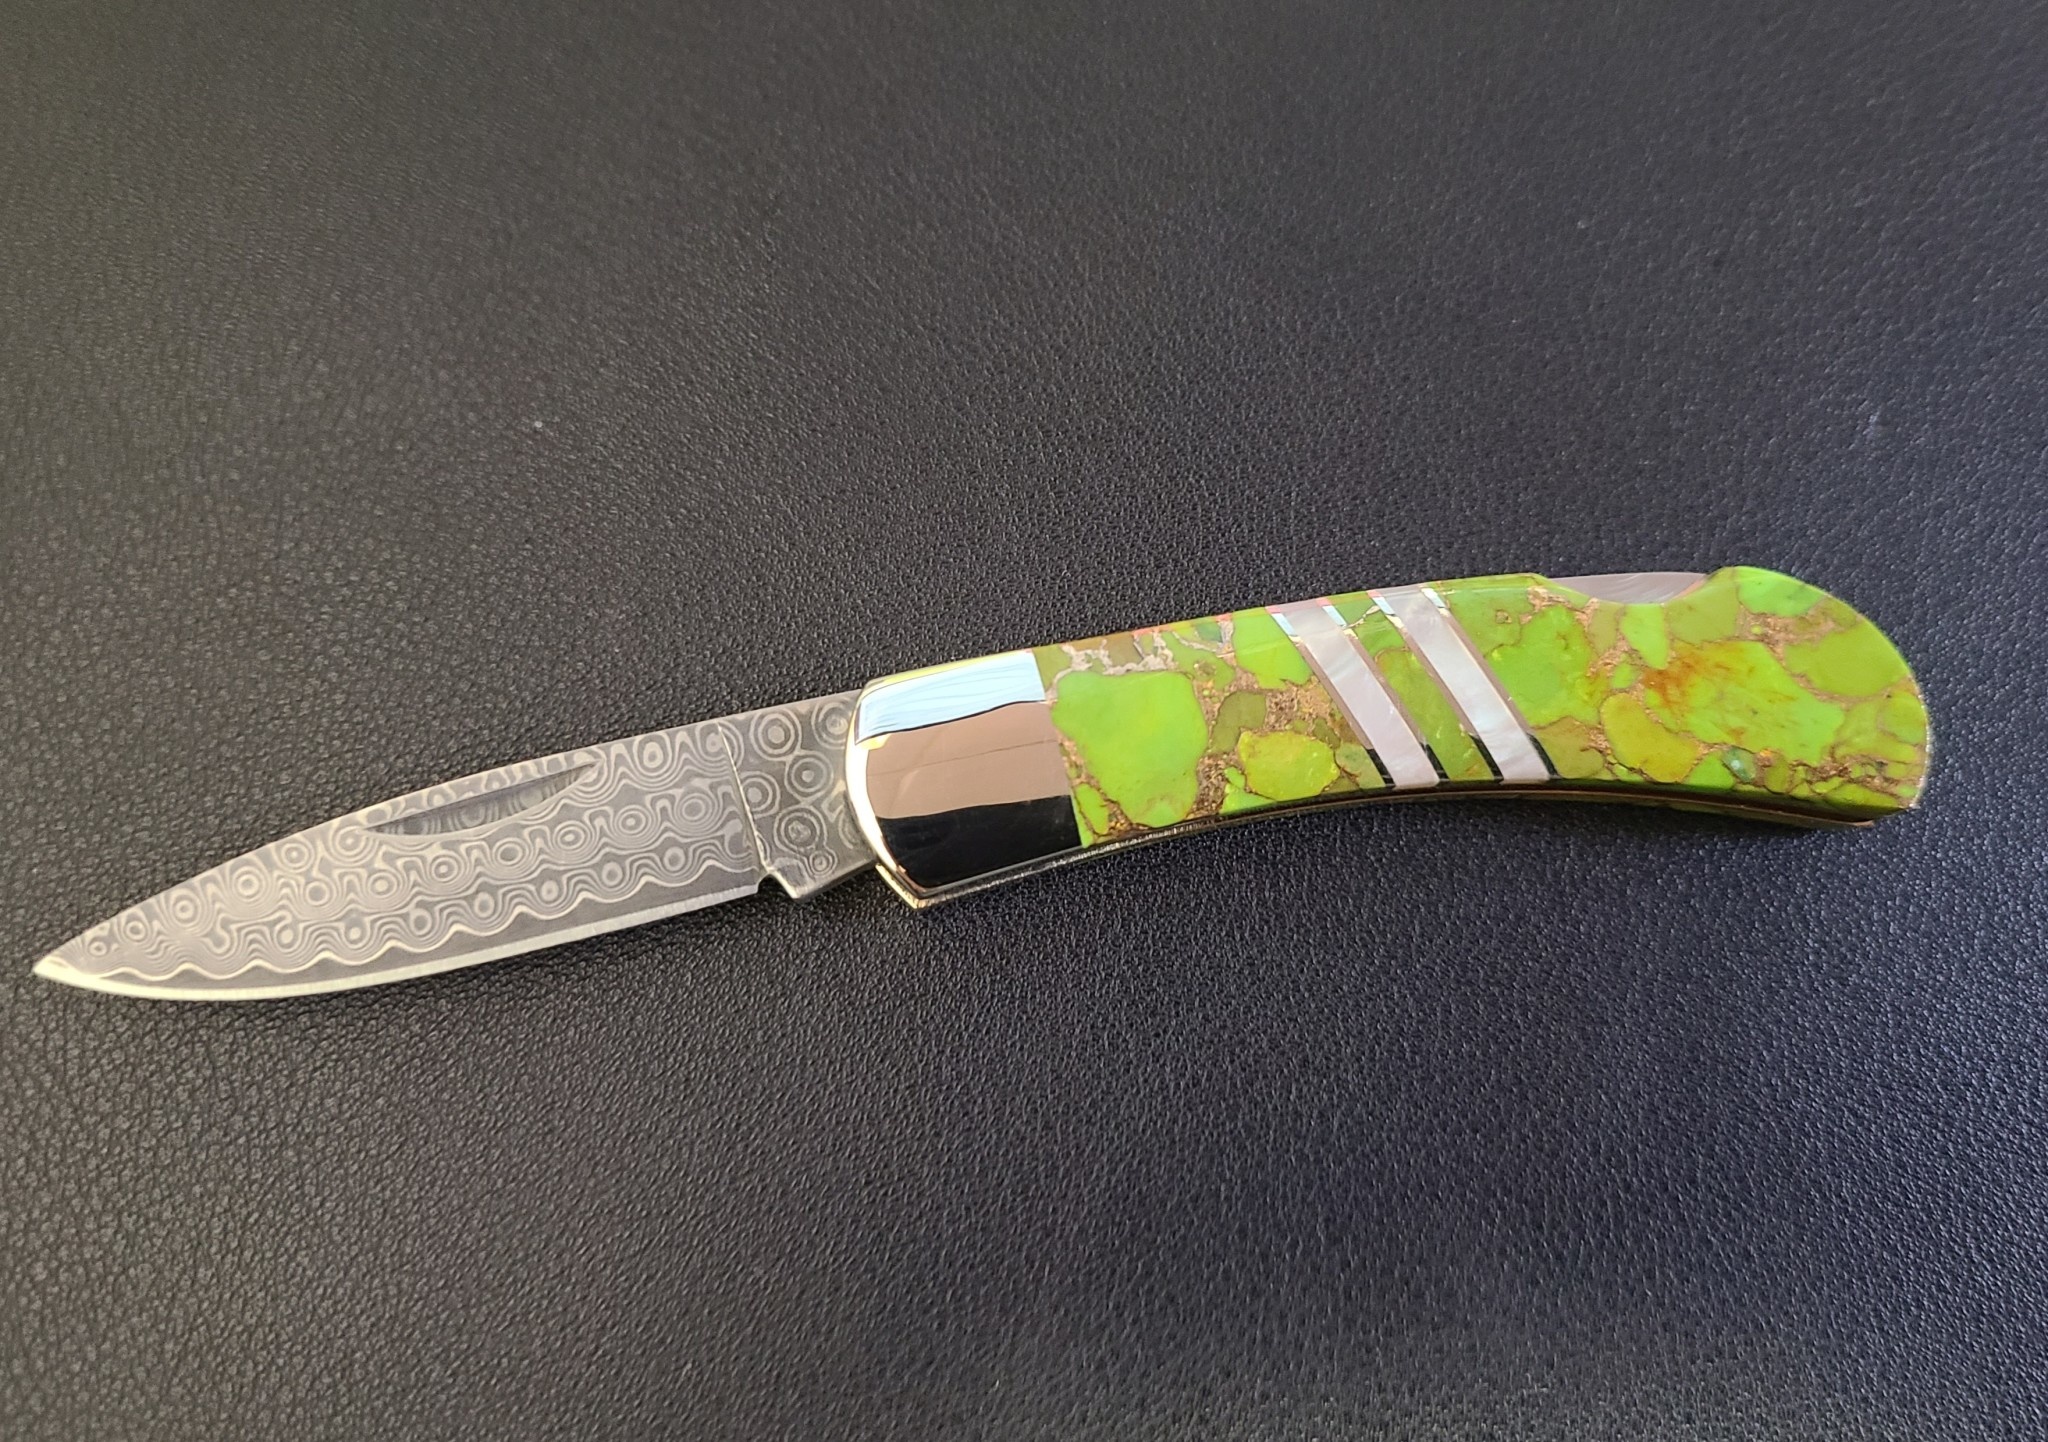 FOR SALE – Stout Handmade Knives